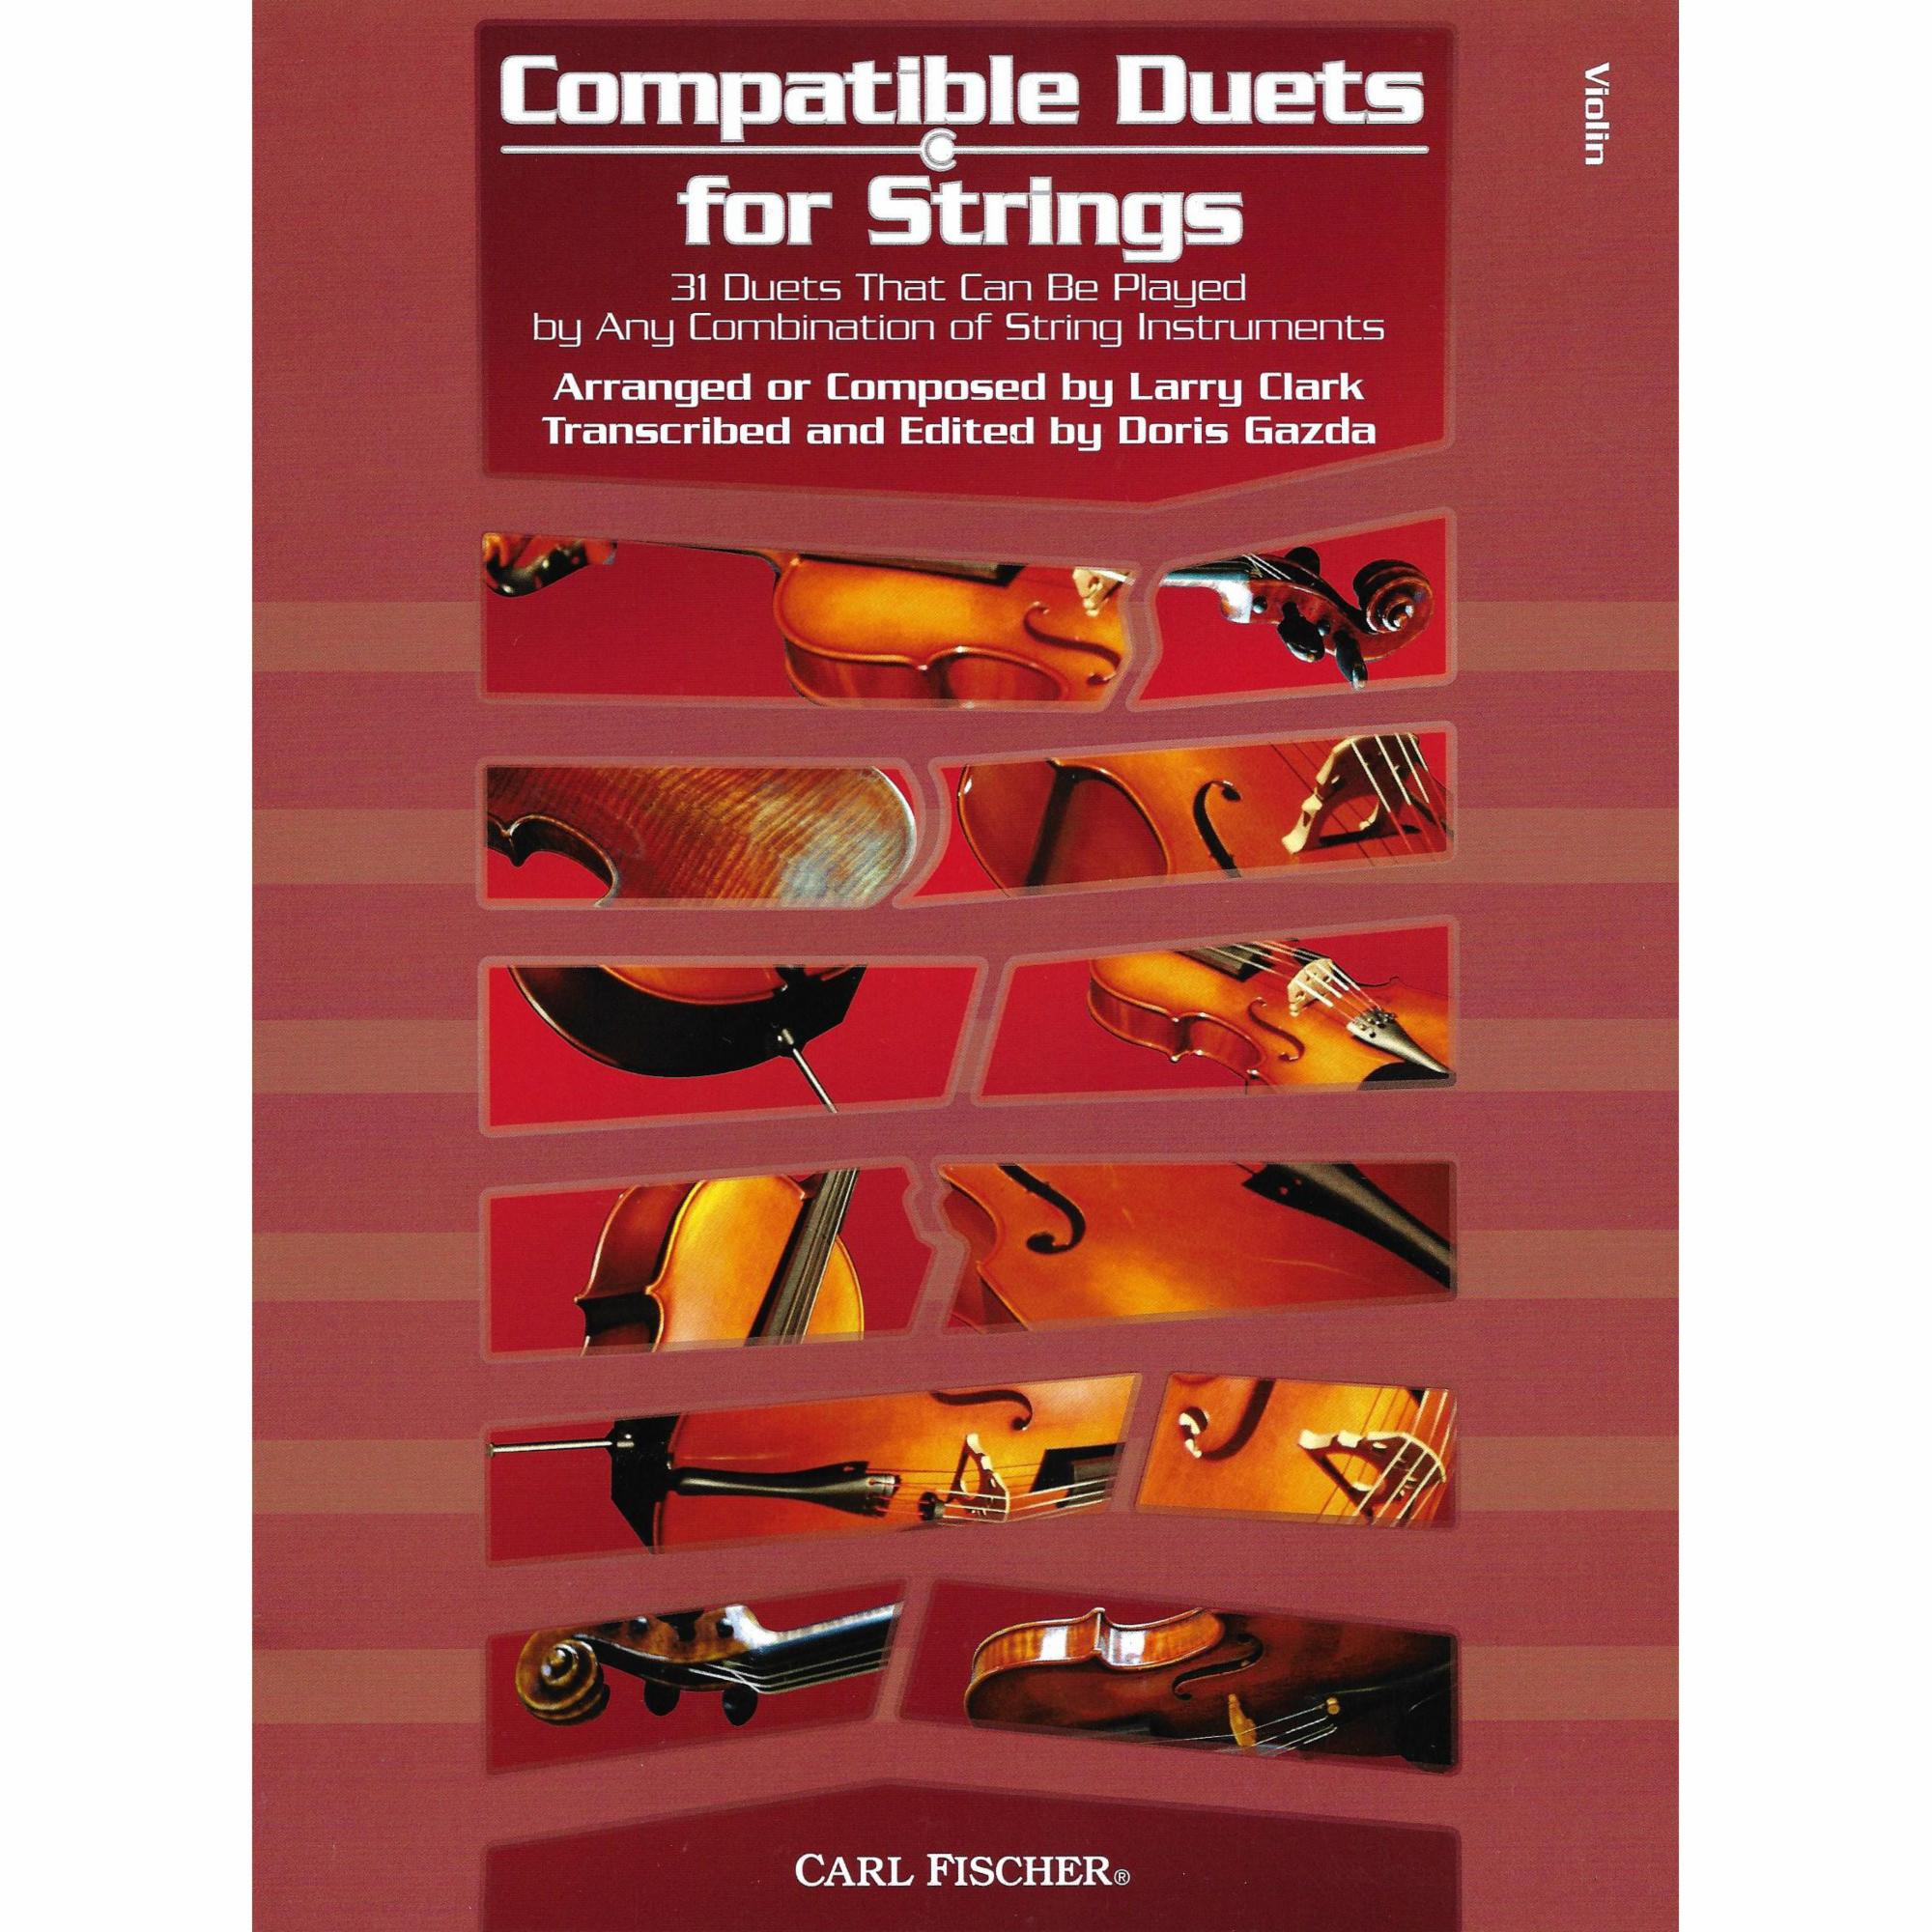 Compatible Duets for Strings